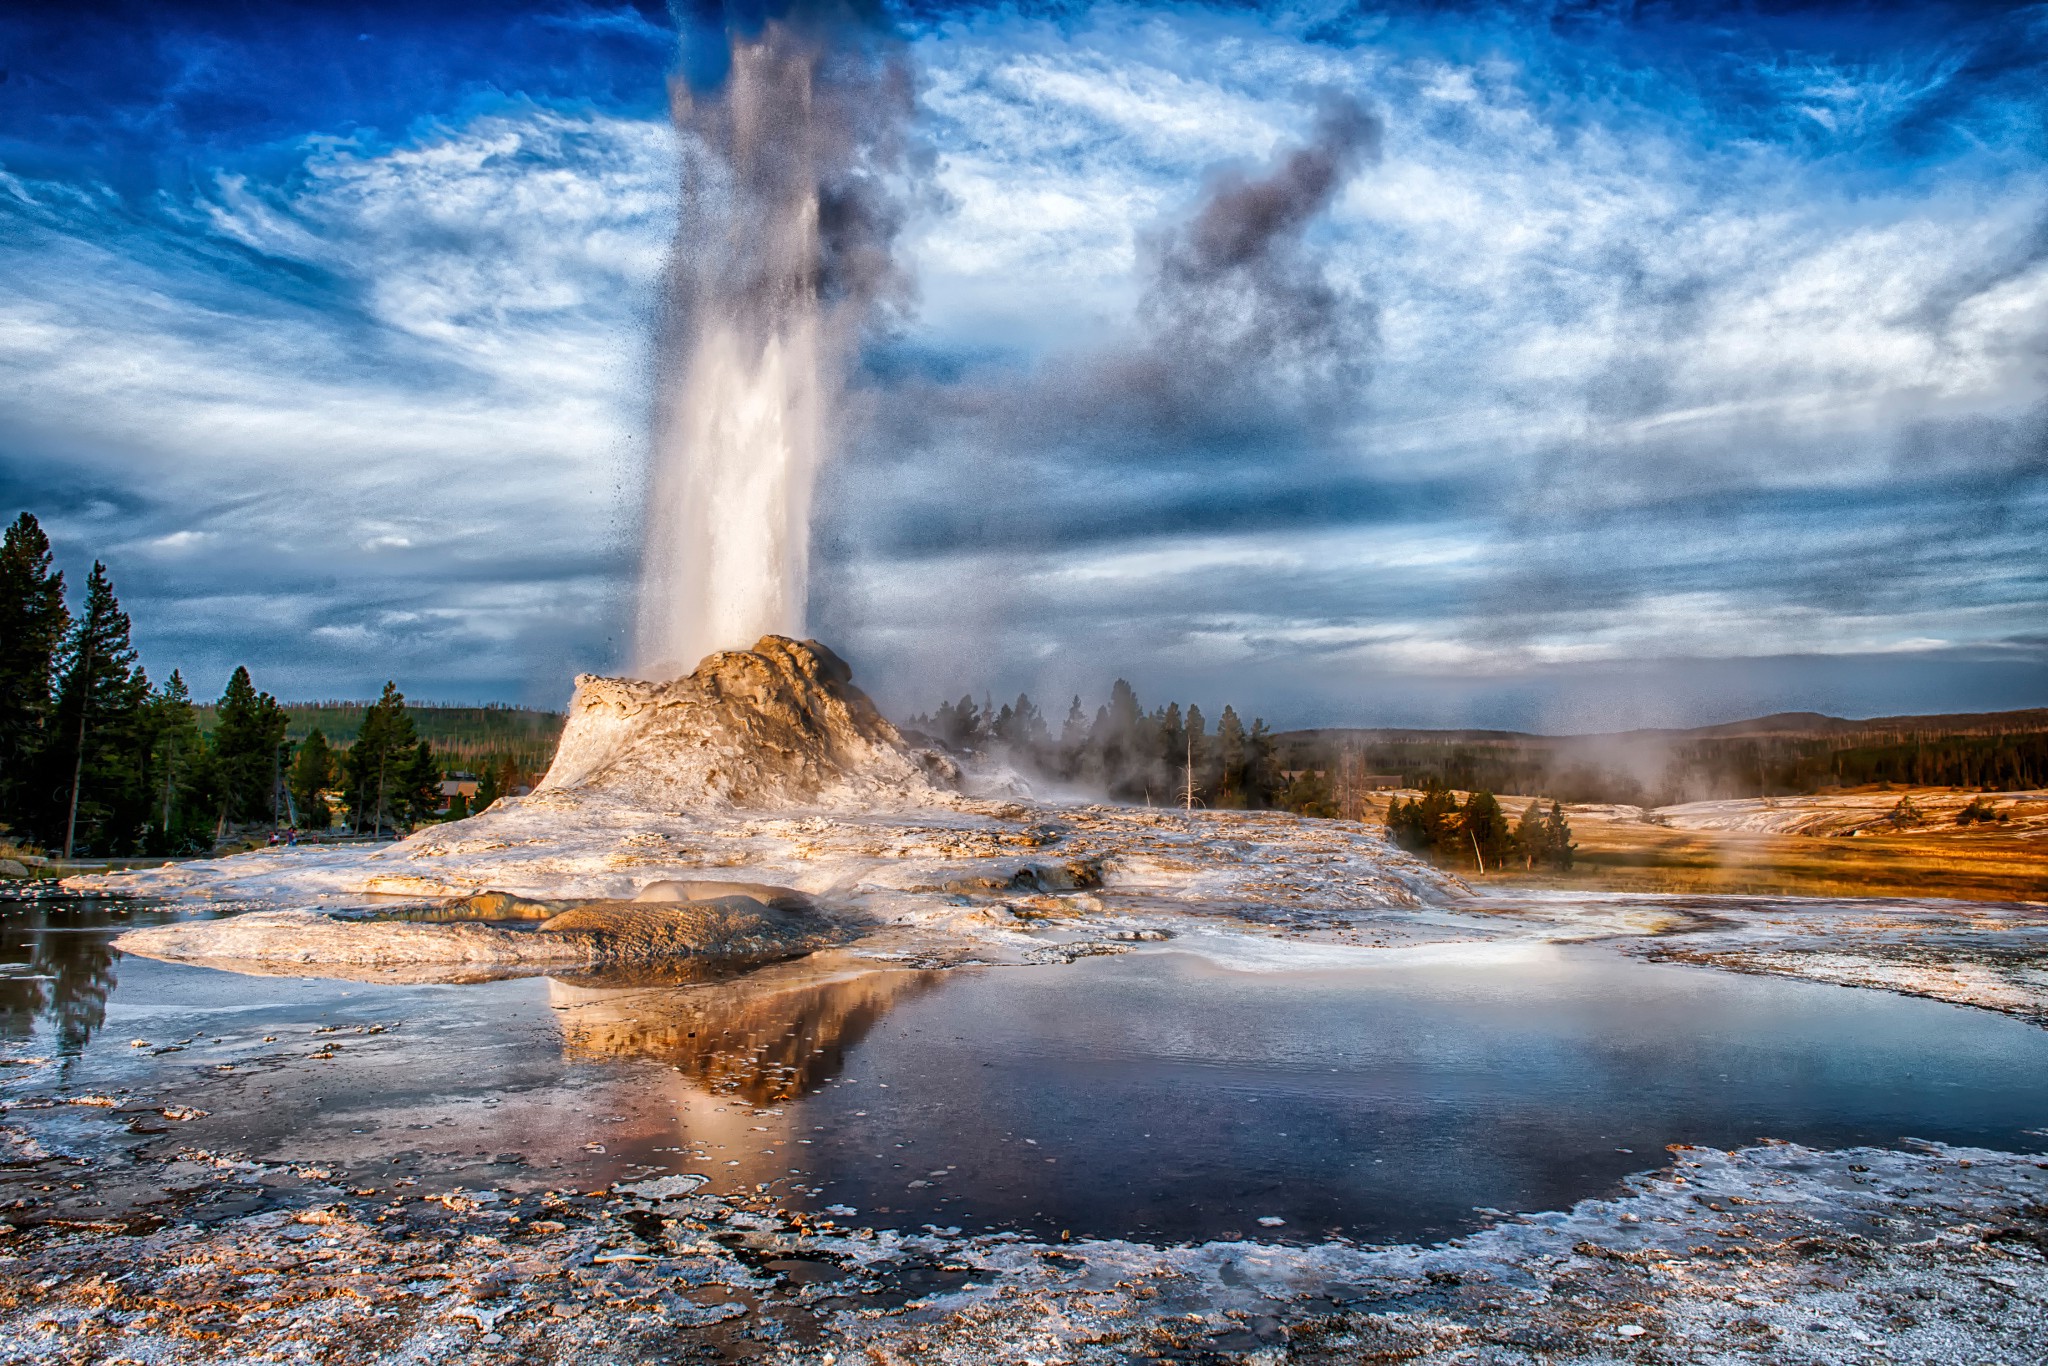 183564-nature-landscape-trees-geysers-water-Wyoming-USA-water_drops-splashes-rock-HDR-clouds-f...jpg